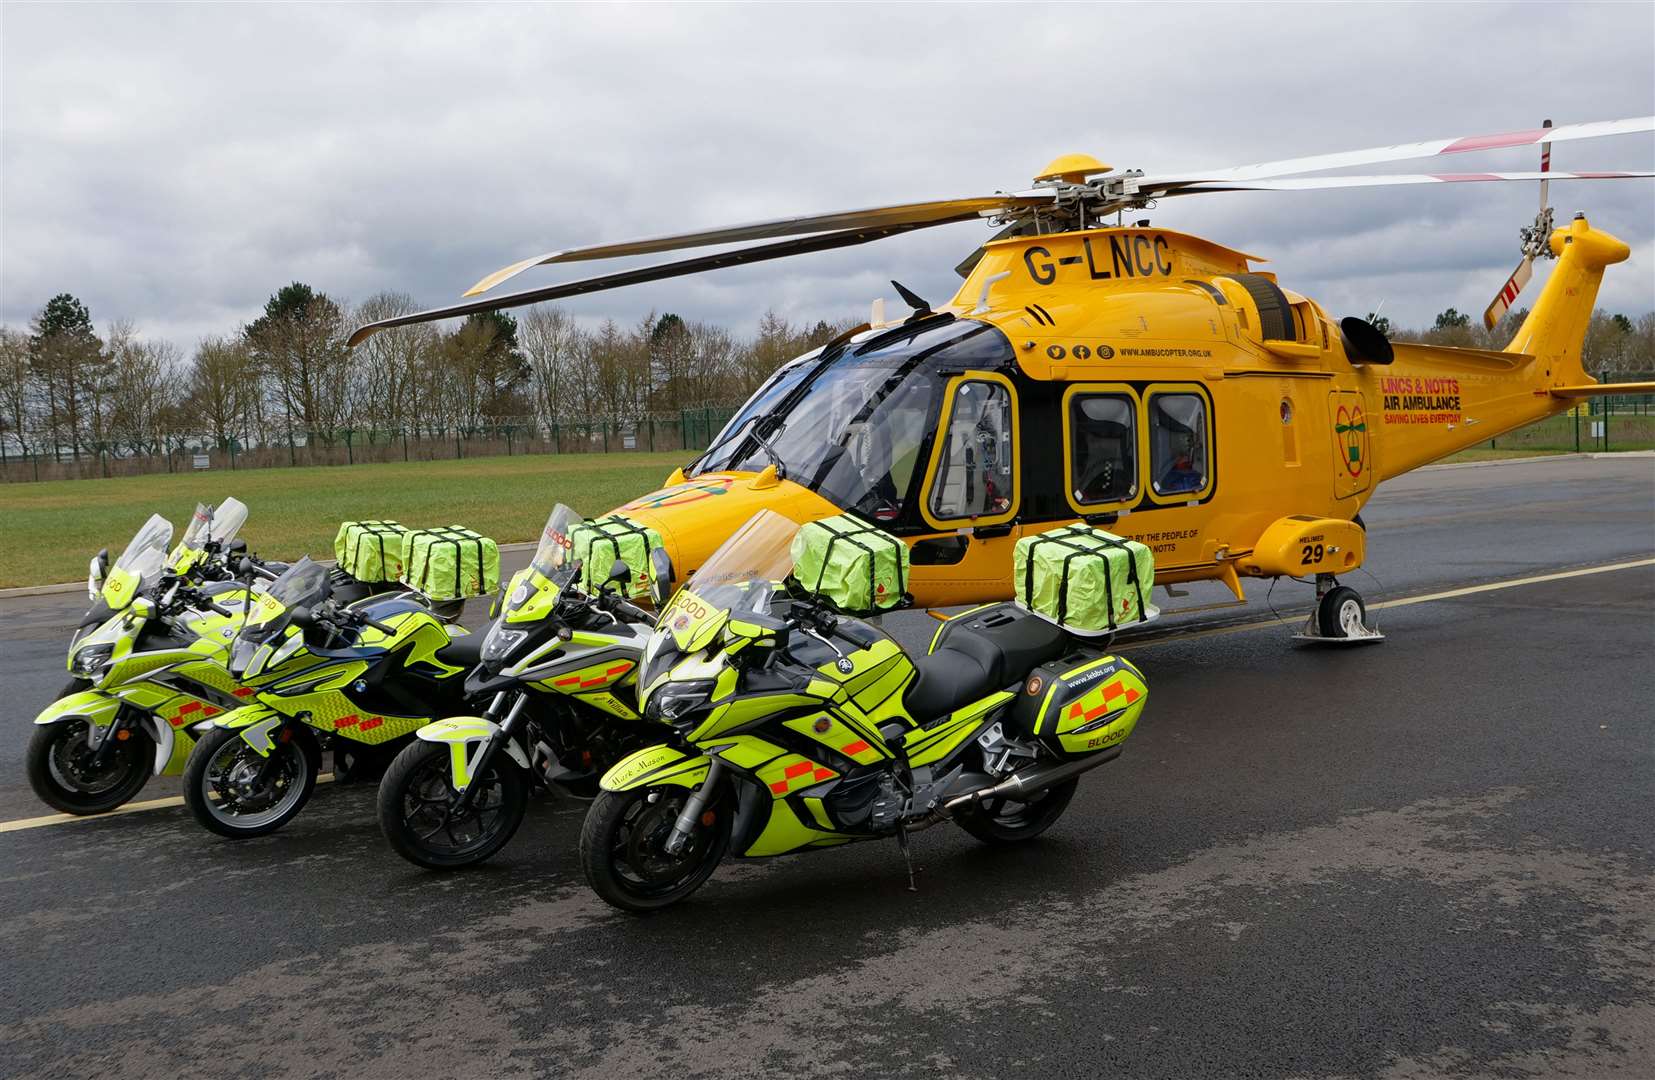 LEBBS collaboration with the ambucopter allows its crew to undertake on-site blood transfusions